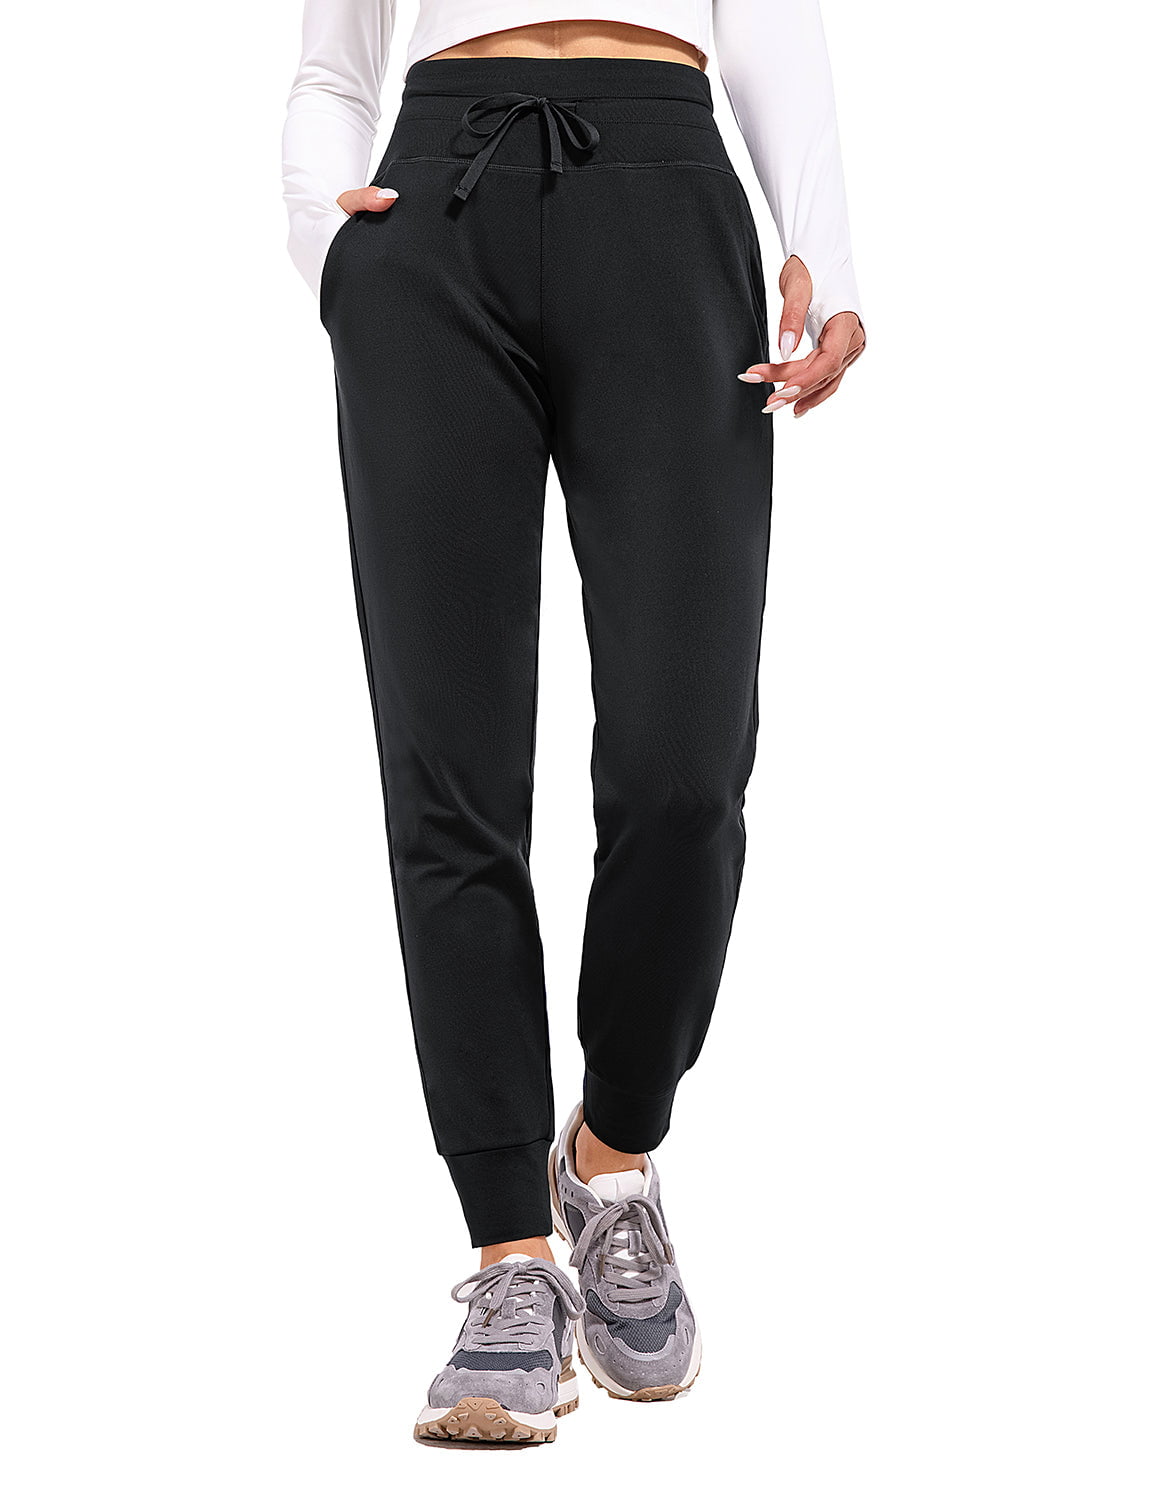 BALEAF Women's Fleece Lined Pants Water Resistant Sweatpants High Waisted  Thermal Joggers Winter Running Hiking Pockets Black XS